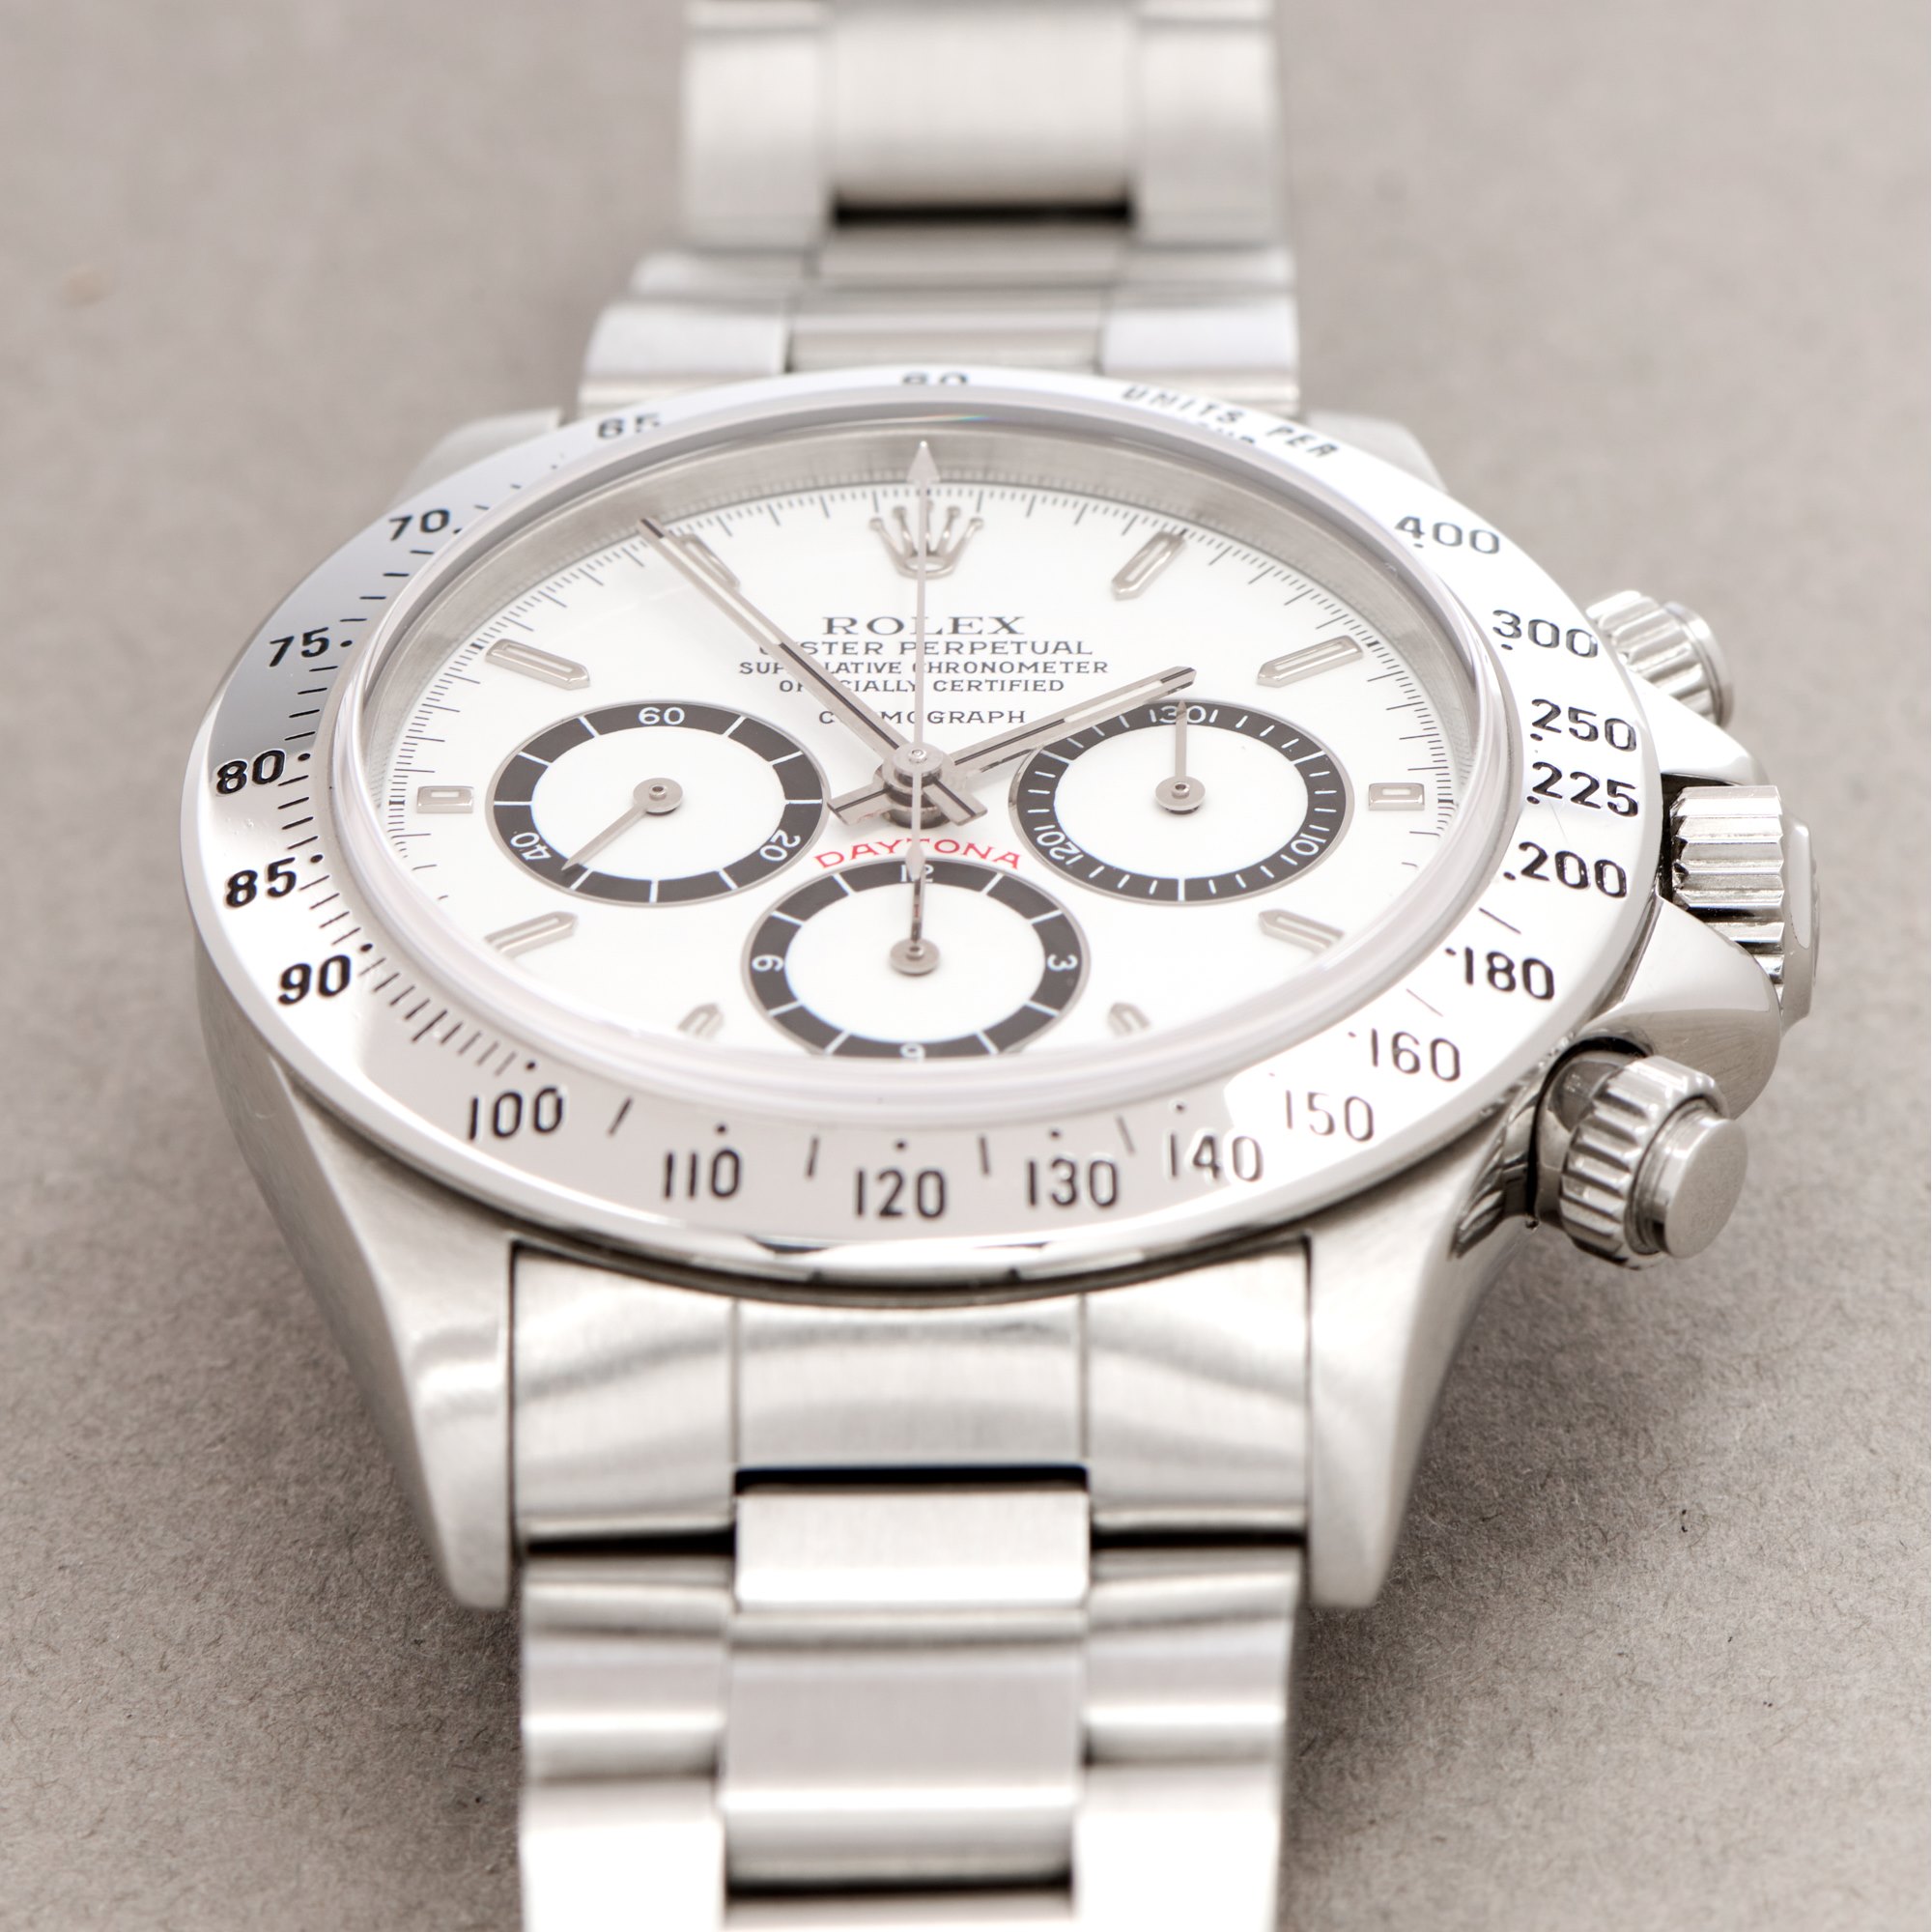 Rolex Daytona Floating Cosmograph, Inverted 6 Roestvrij Staal 16520